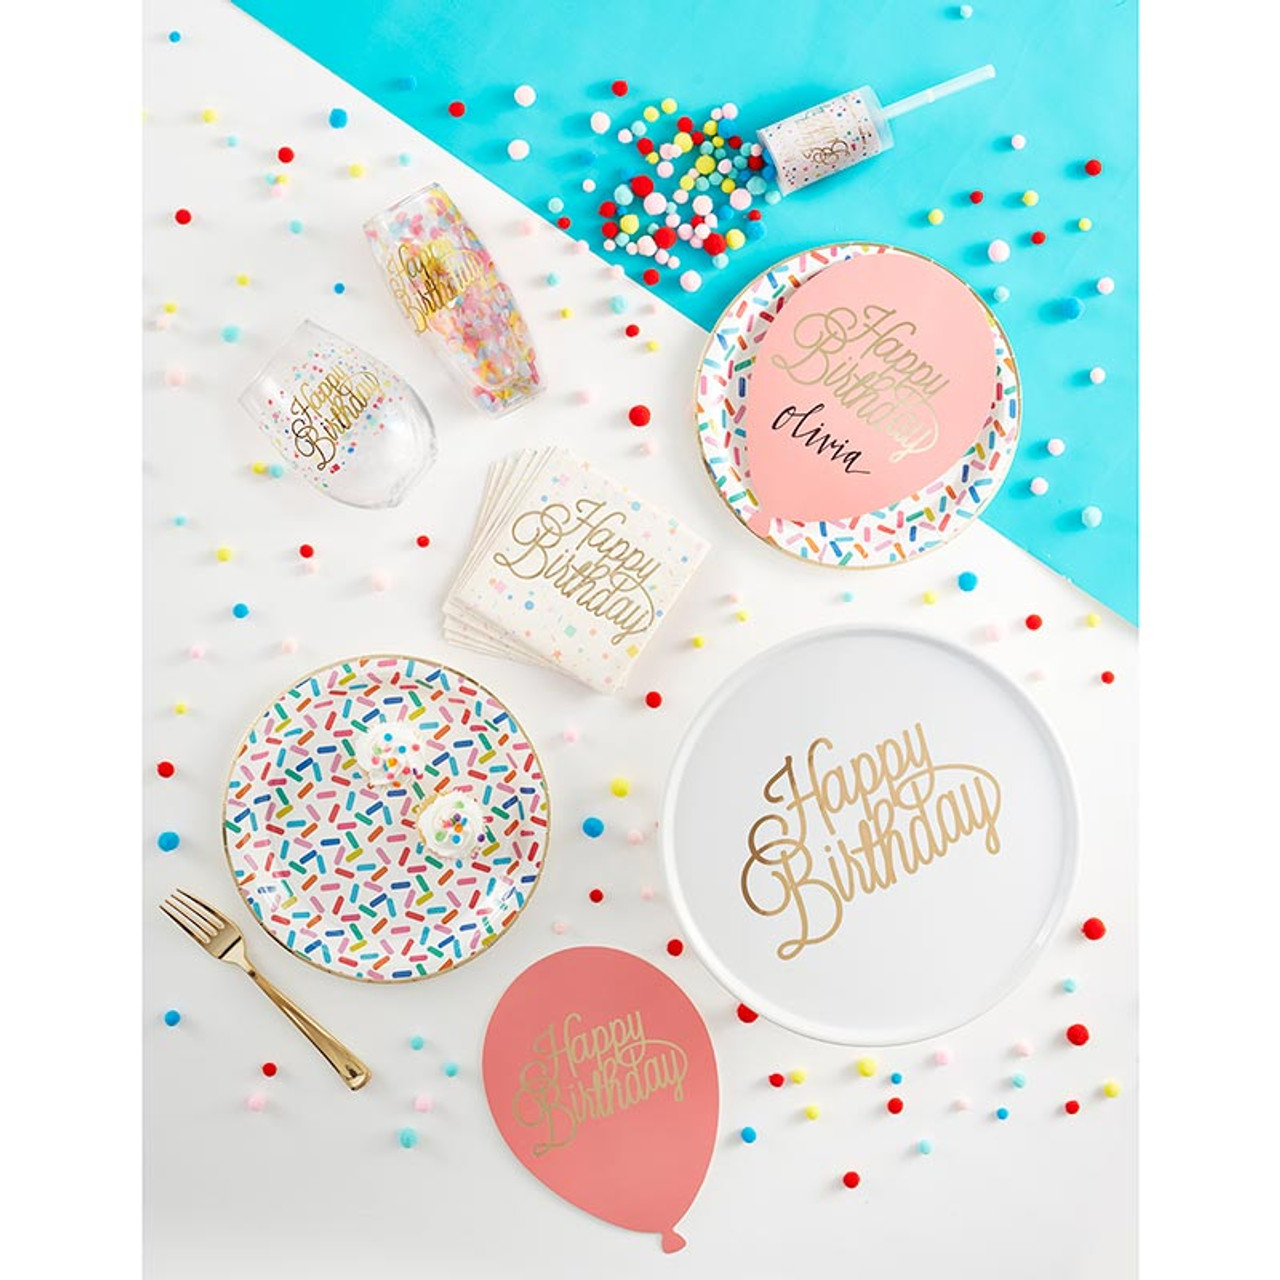 Double-Wall Stemless Glass - Confetti Paper - Slant Collections